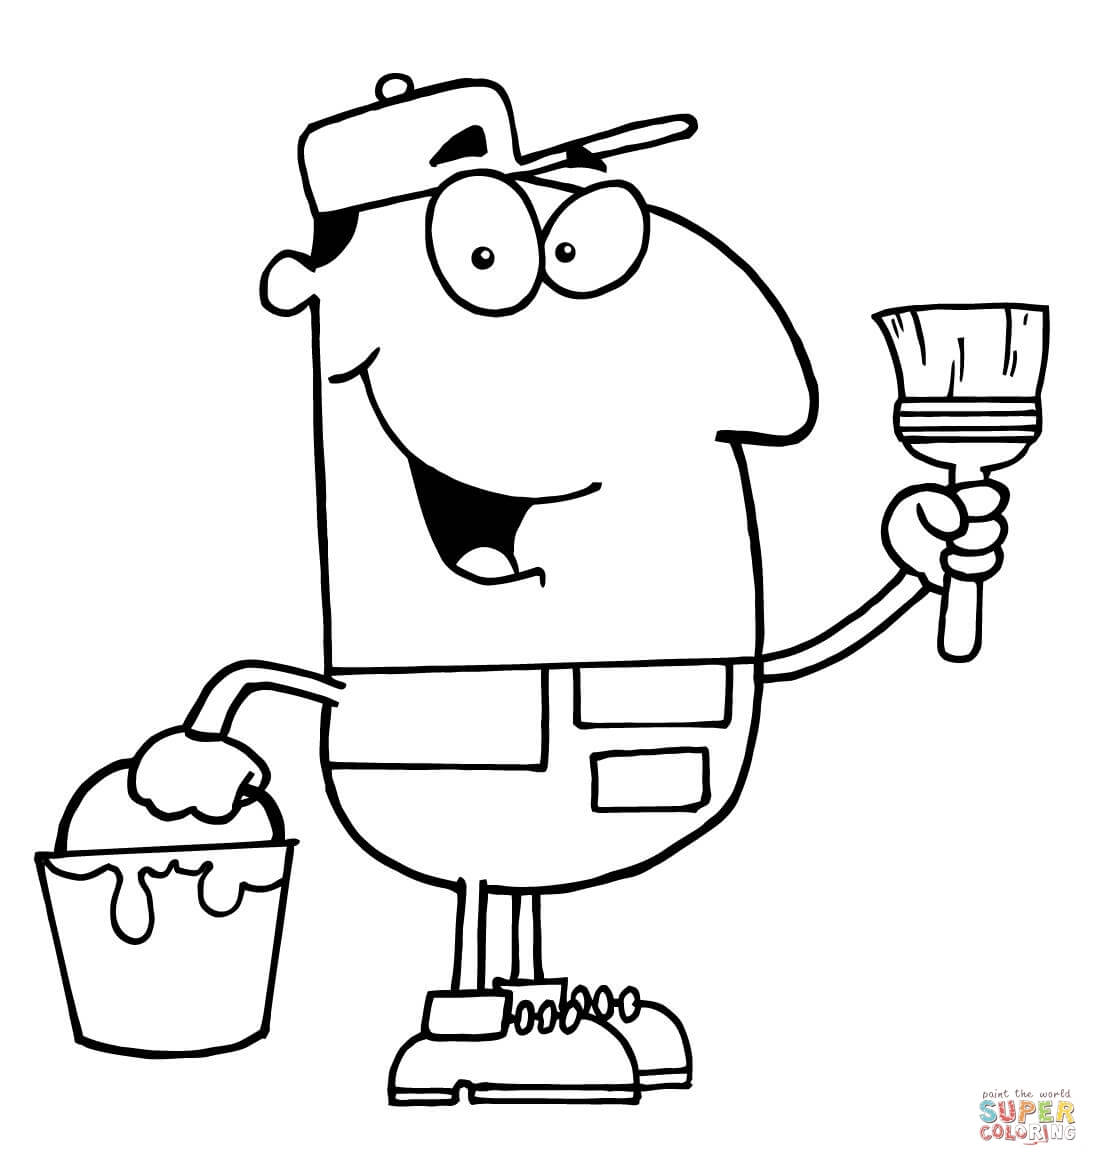 Construction Painter coloring page | Free Printable Coloring Pages